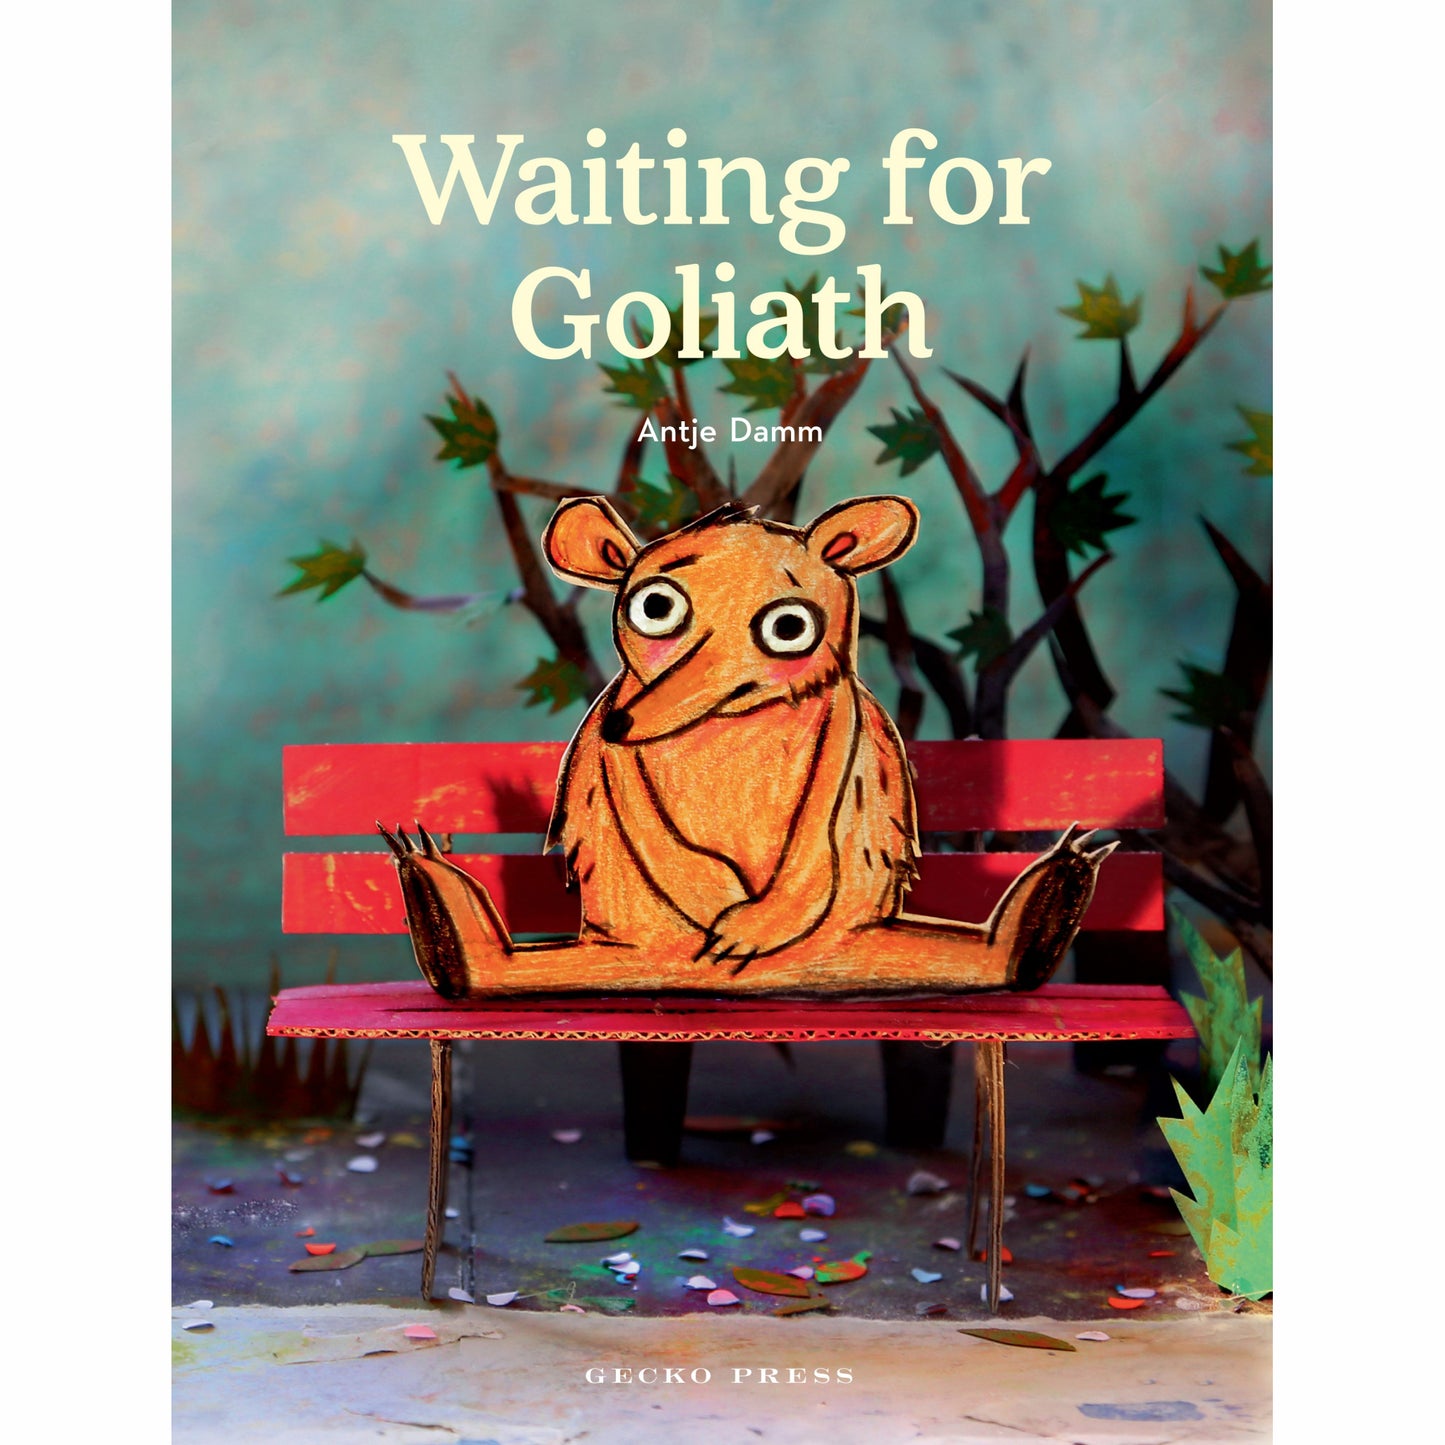 Waiting-for-Goliath-cover.jpg